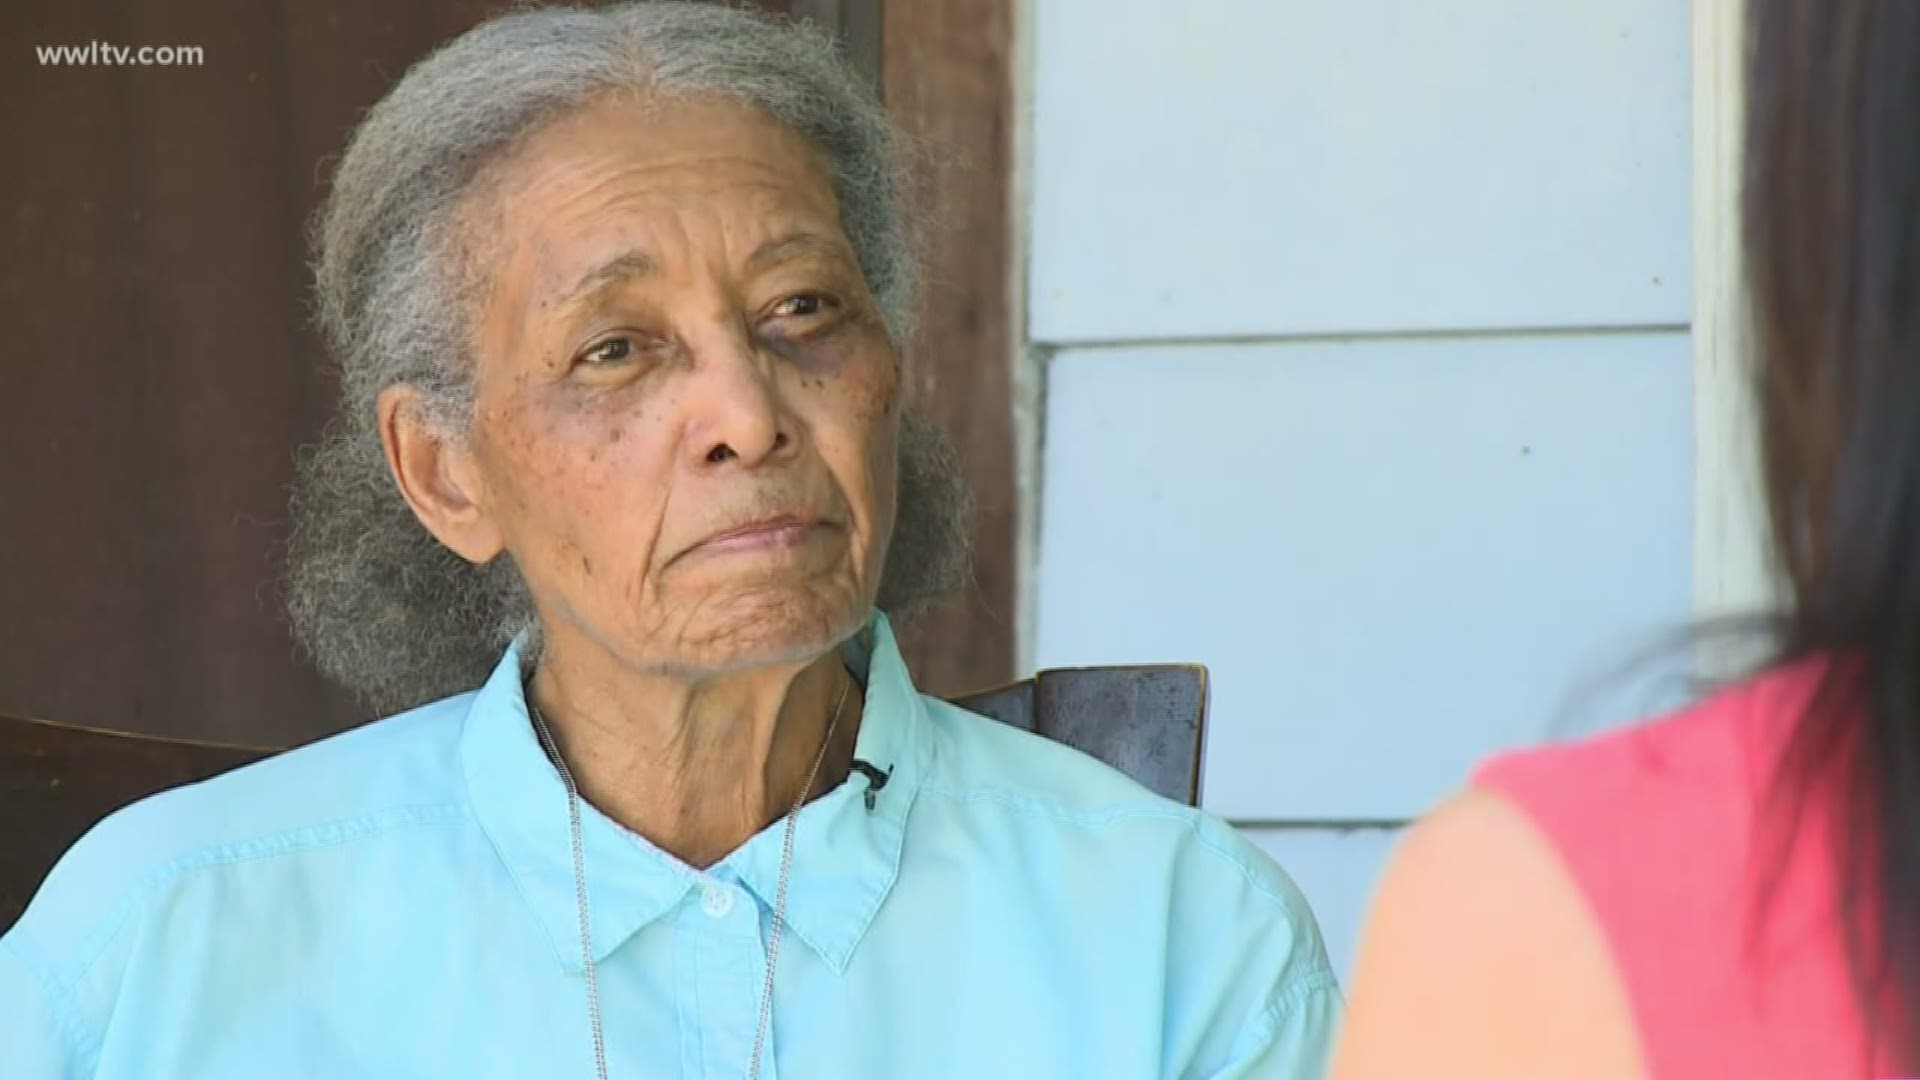 The grandmother of Mark Spicer, the 21-year-old man accused of killing Mandeville captain Vincent Liberto and wounding Officer Ben Cato said she is still in shock.